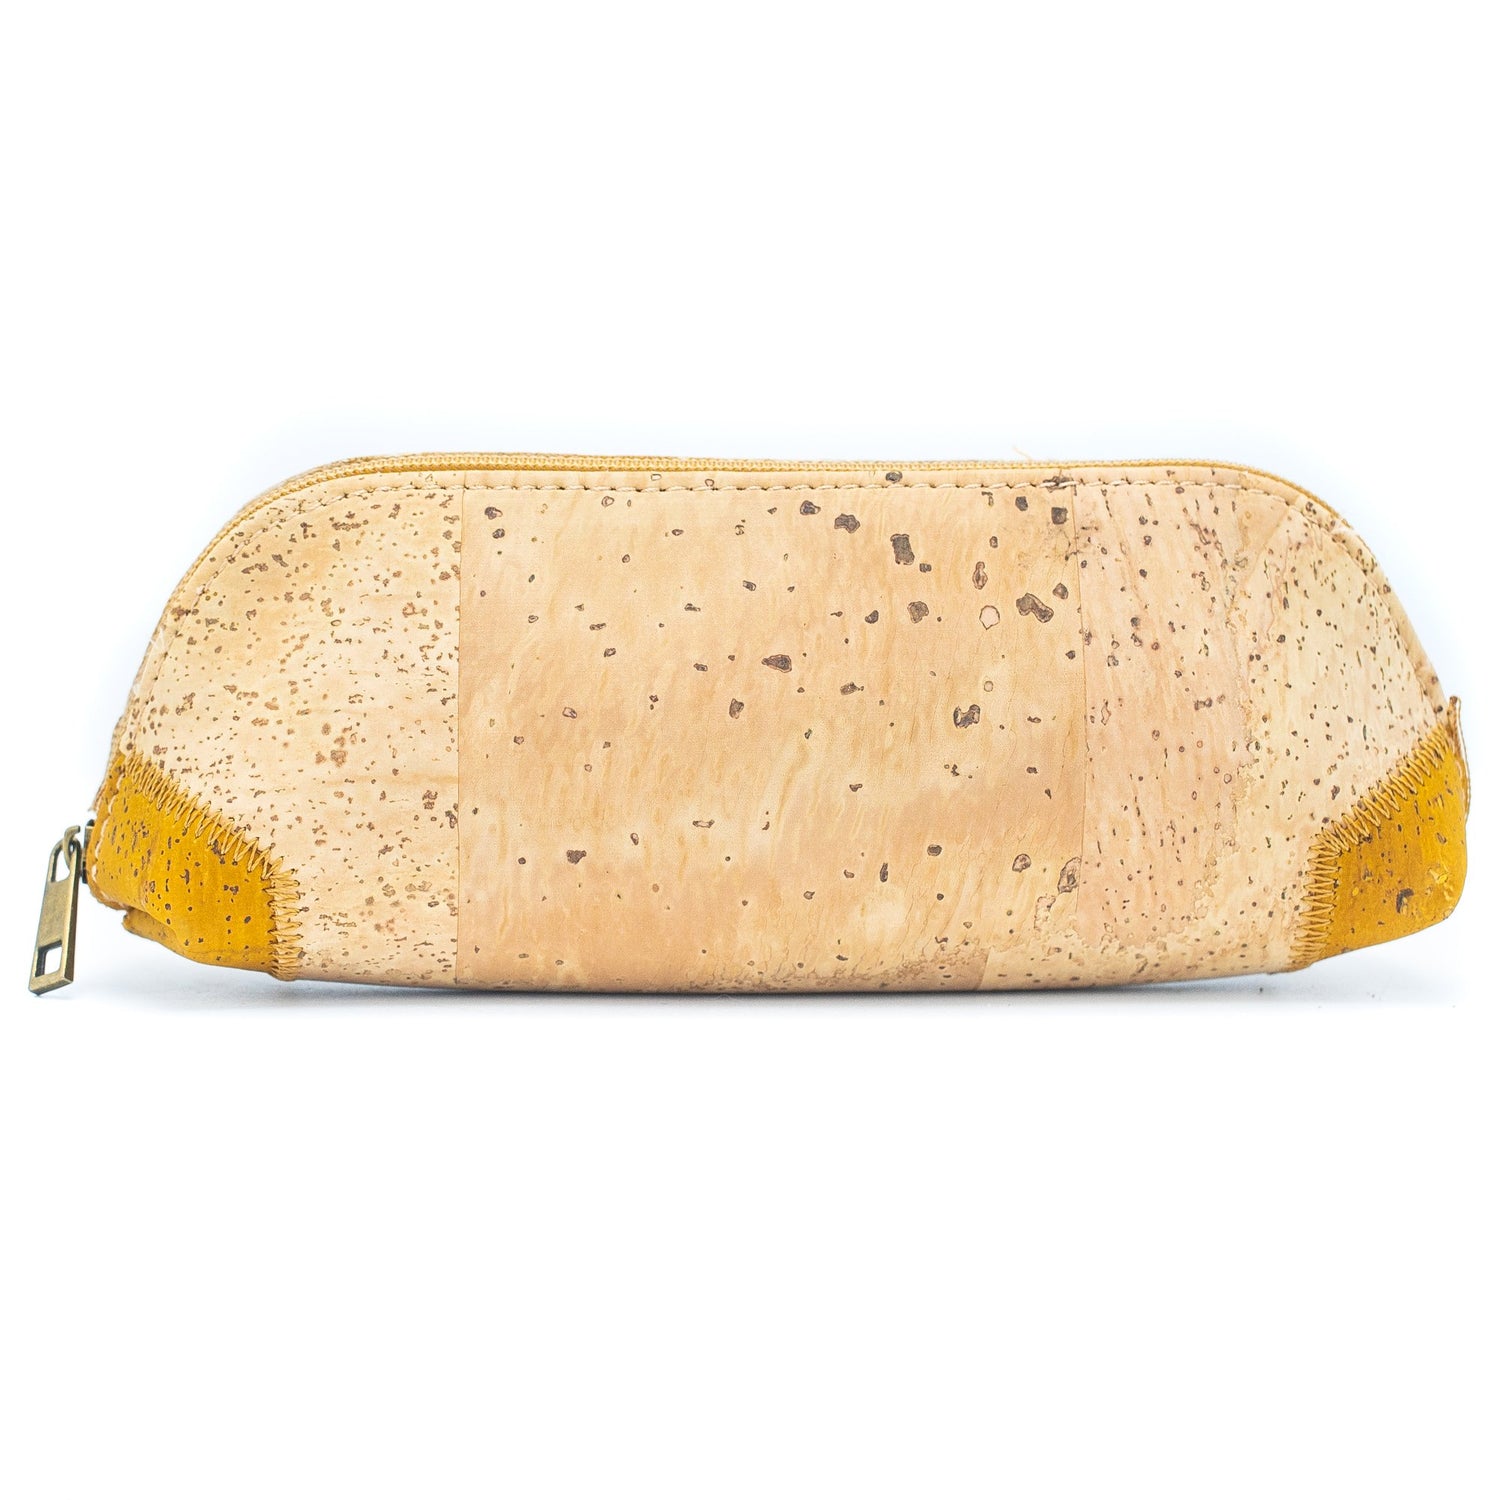 Tampon or Pad holder- Curved Compact Cork Case